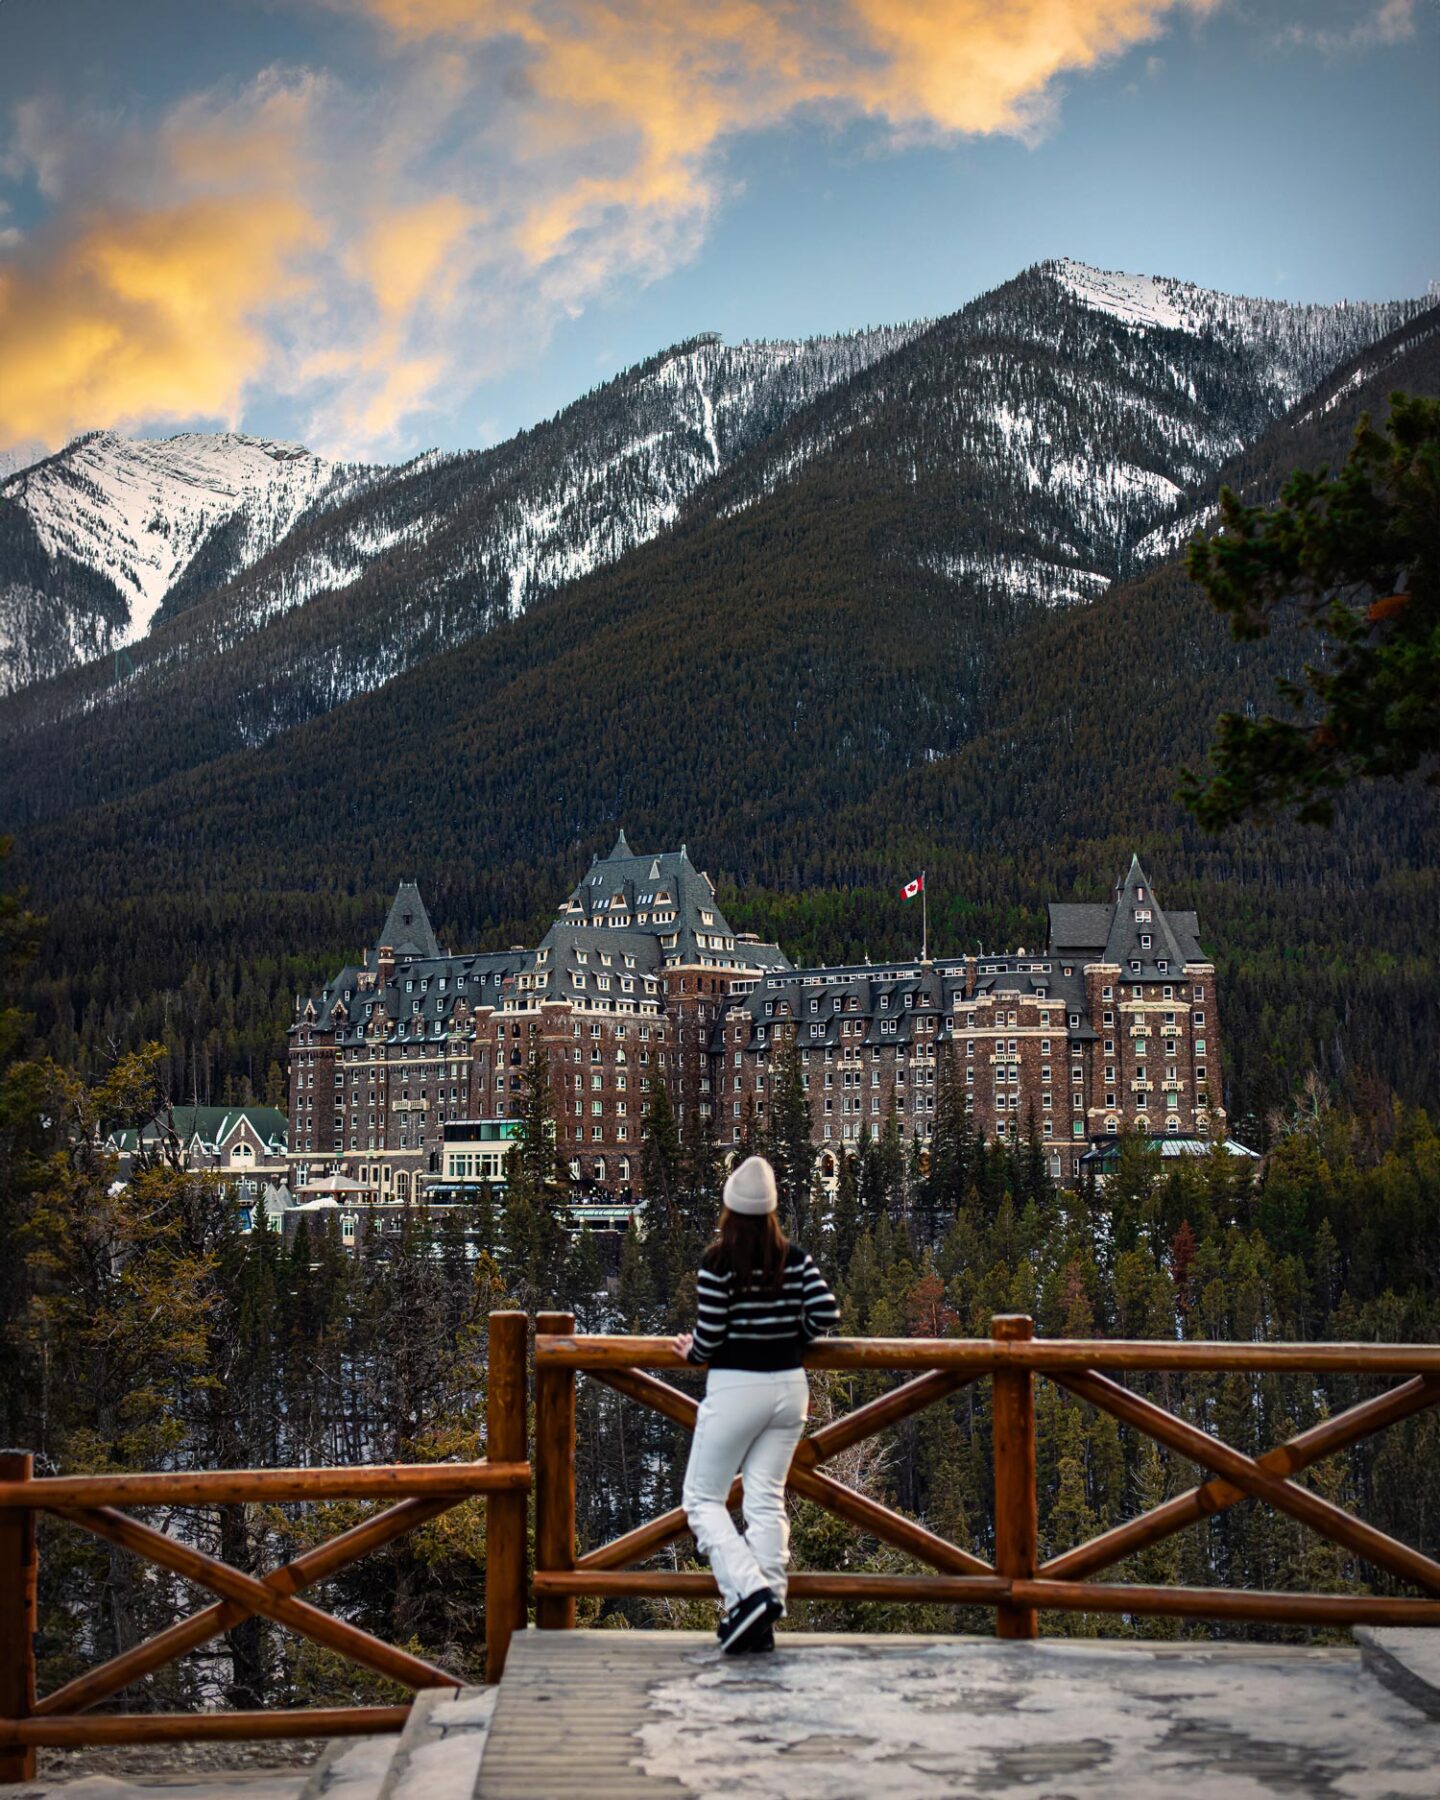 Kelsey stands at a wooden fence with a view of Fairmont Banff Springs hotel in the background